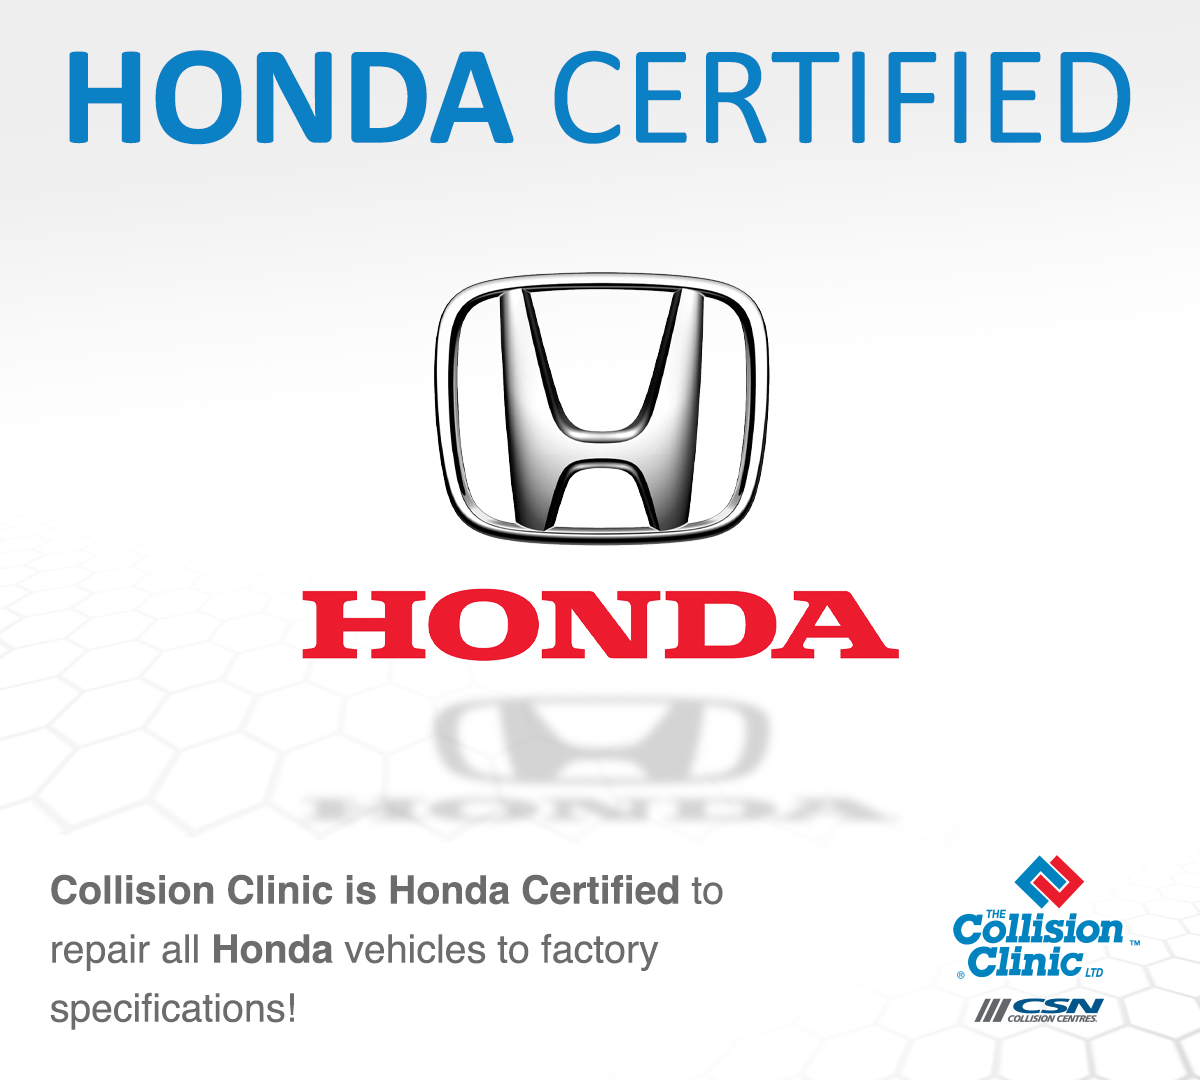 We're HONDA Certified! 

Collision Clinic CSN – customer preferred for all makes and models, on Topsail Road and Torbay Road!

#RightToChoose #MostCertified #ThatsCollisionClinic #HONDACertified